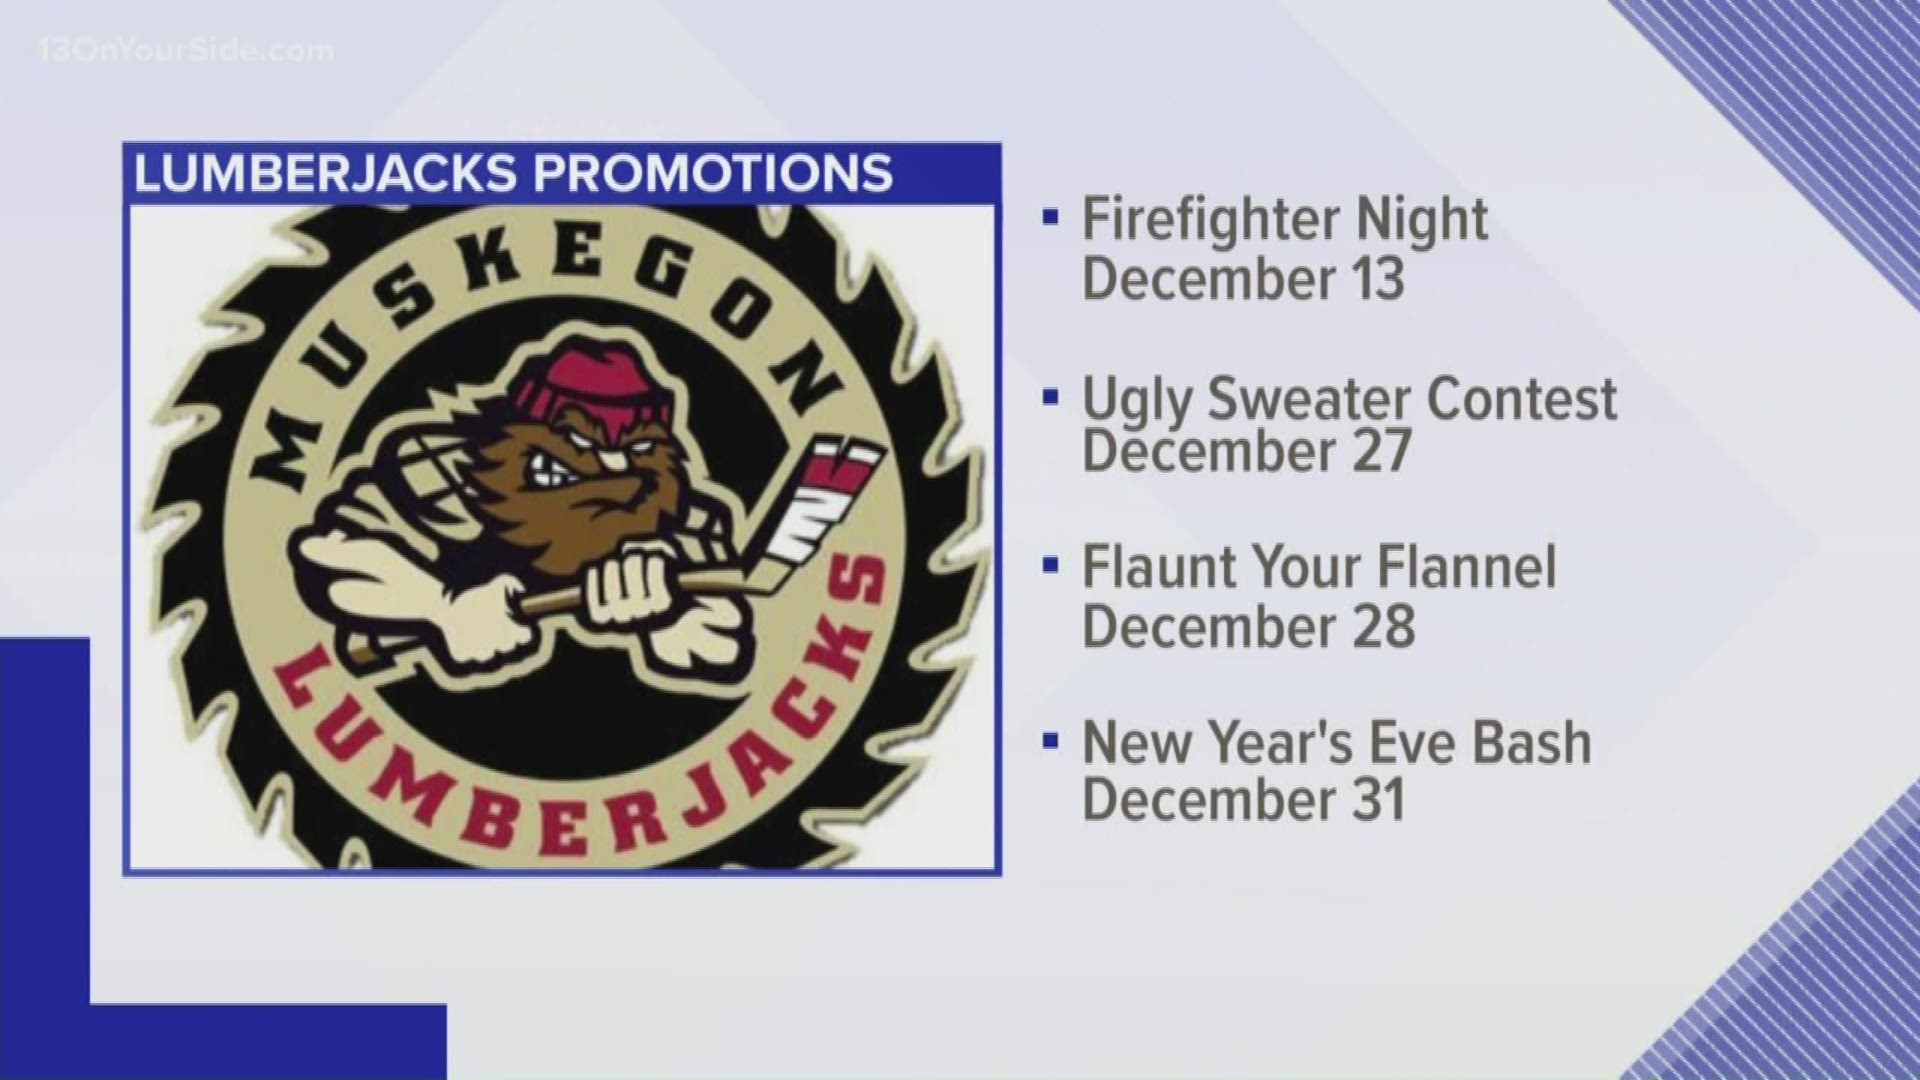 The Lumberjacks will have several home games filled with fun for the whole family.